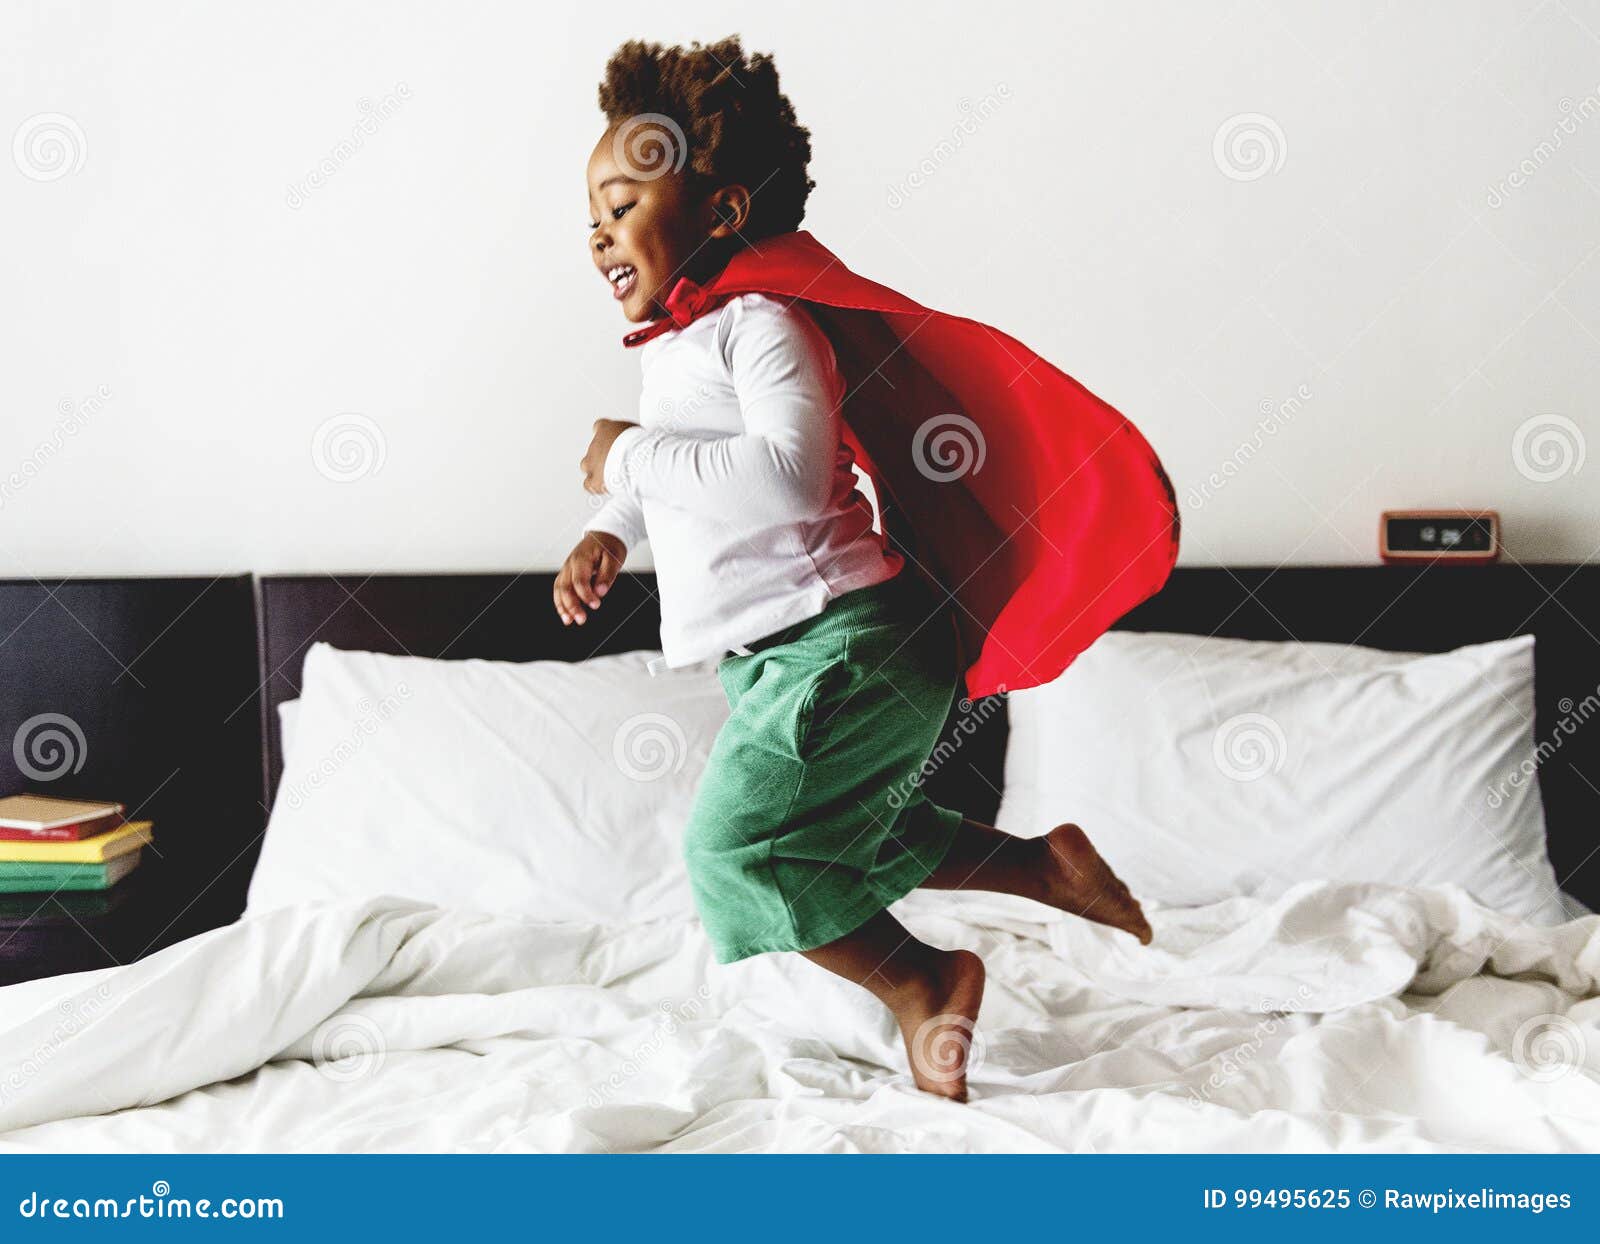 african descent kid jumping on the bed with robe